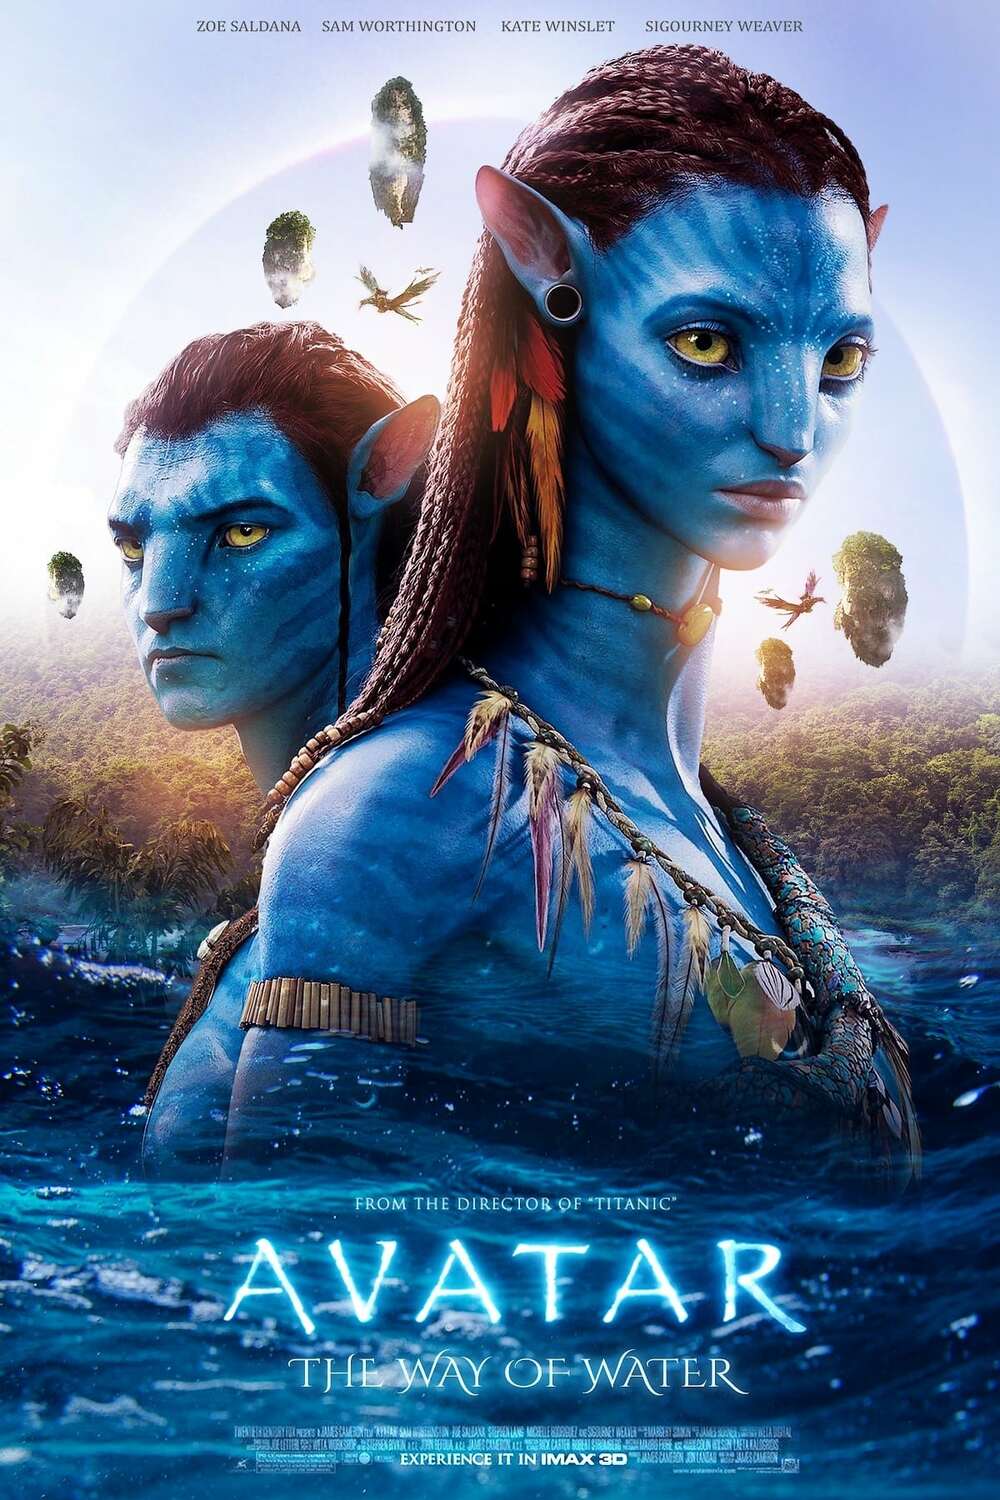 Avatar The Way Of Water Blu Ray Release Date - Alton Cain Info